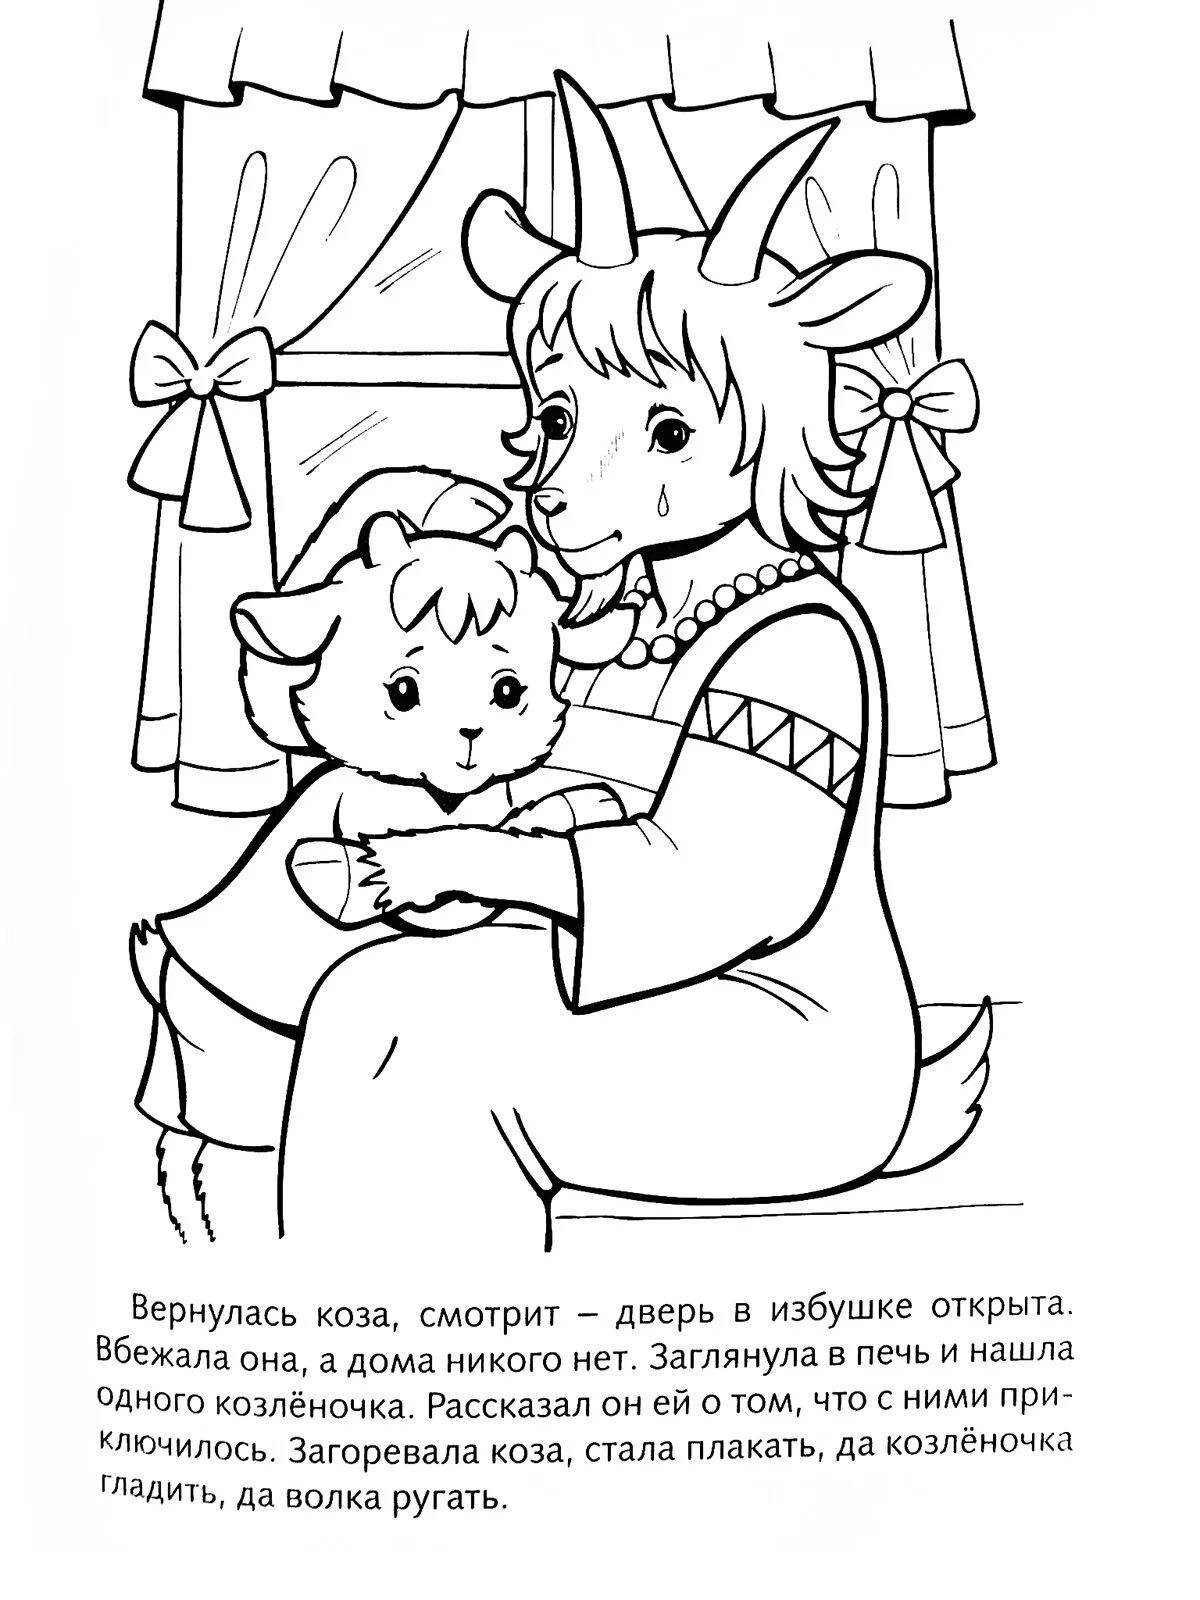 Creative coloring page 7 for kids